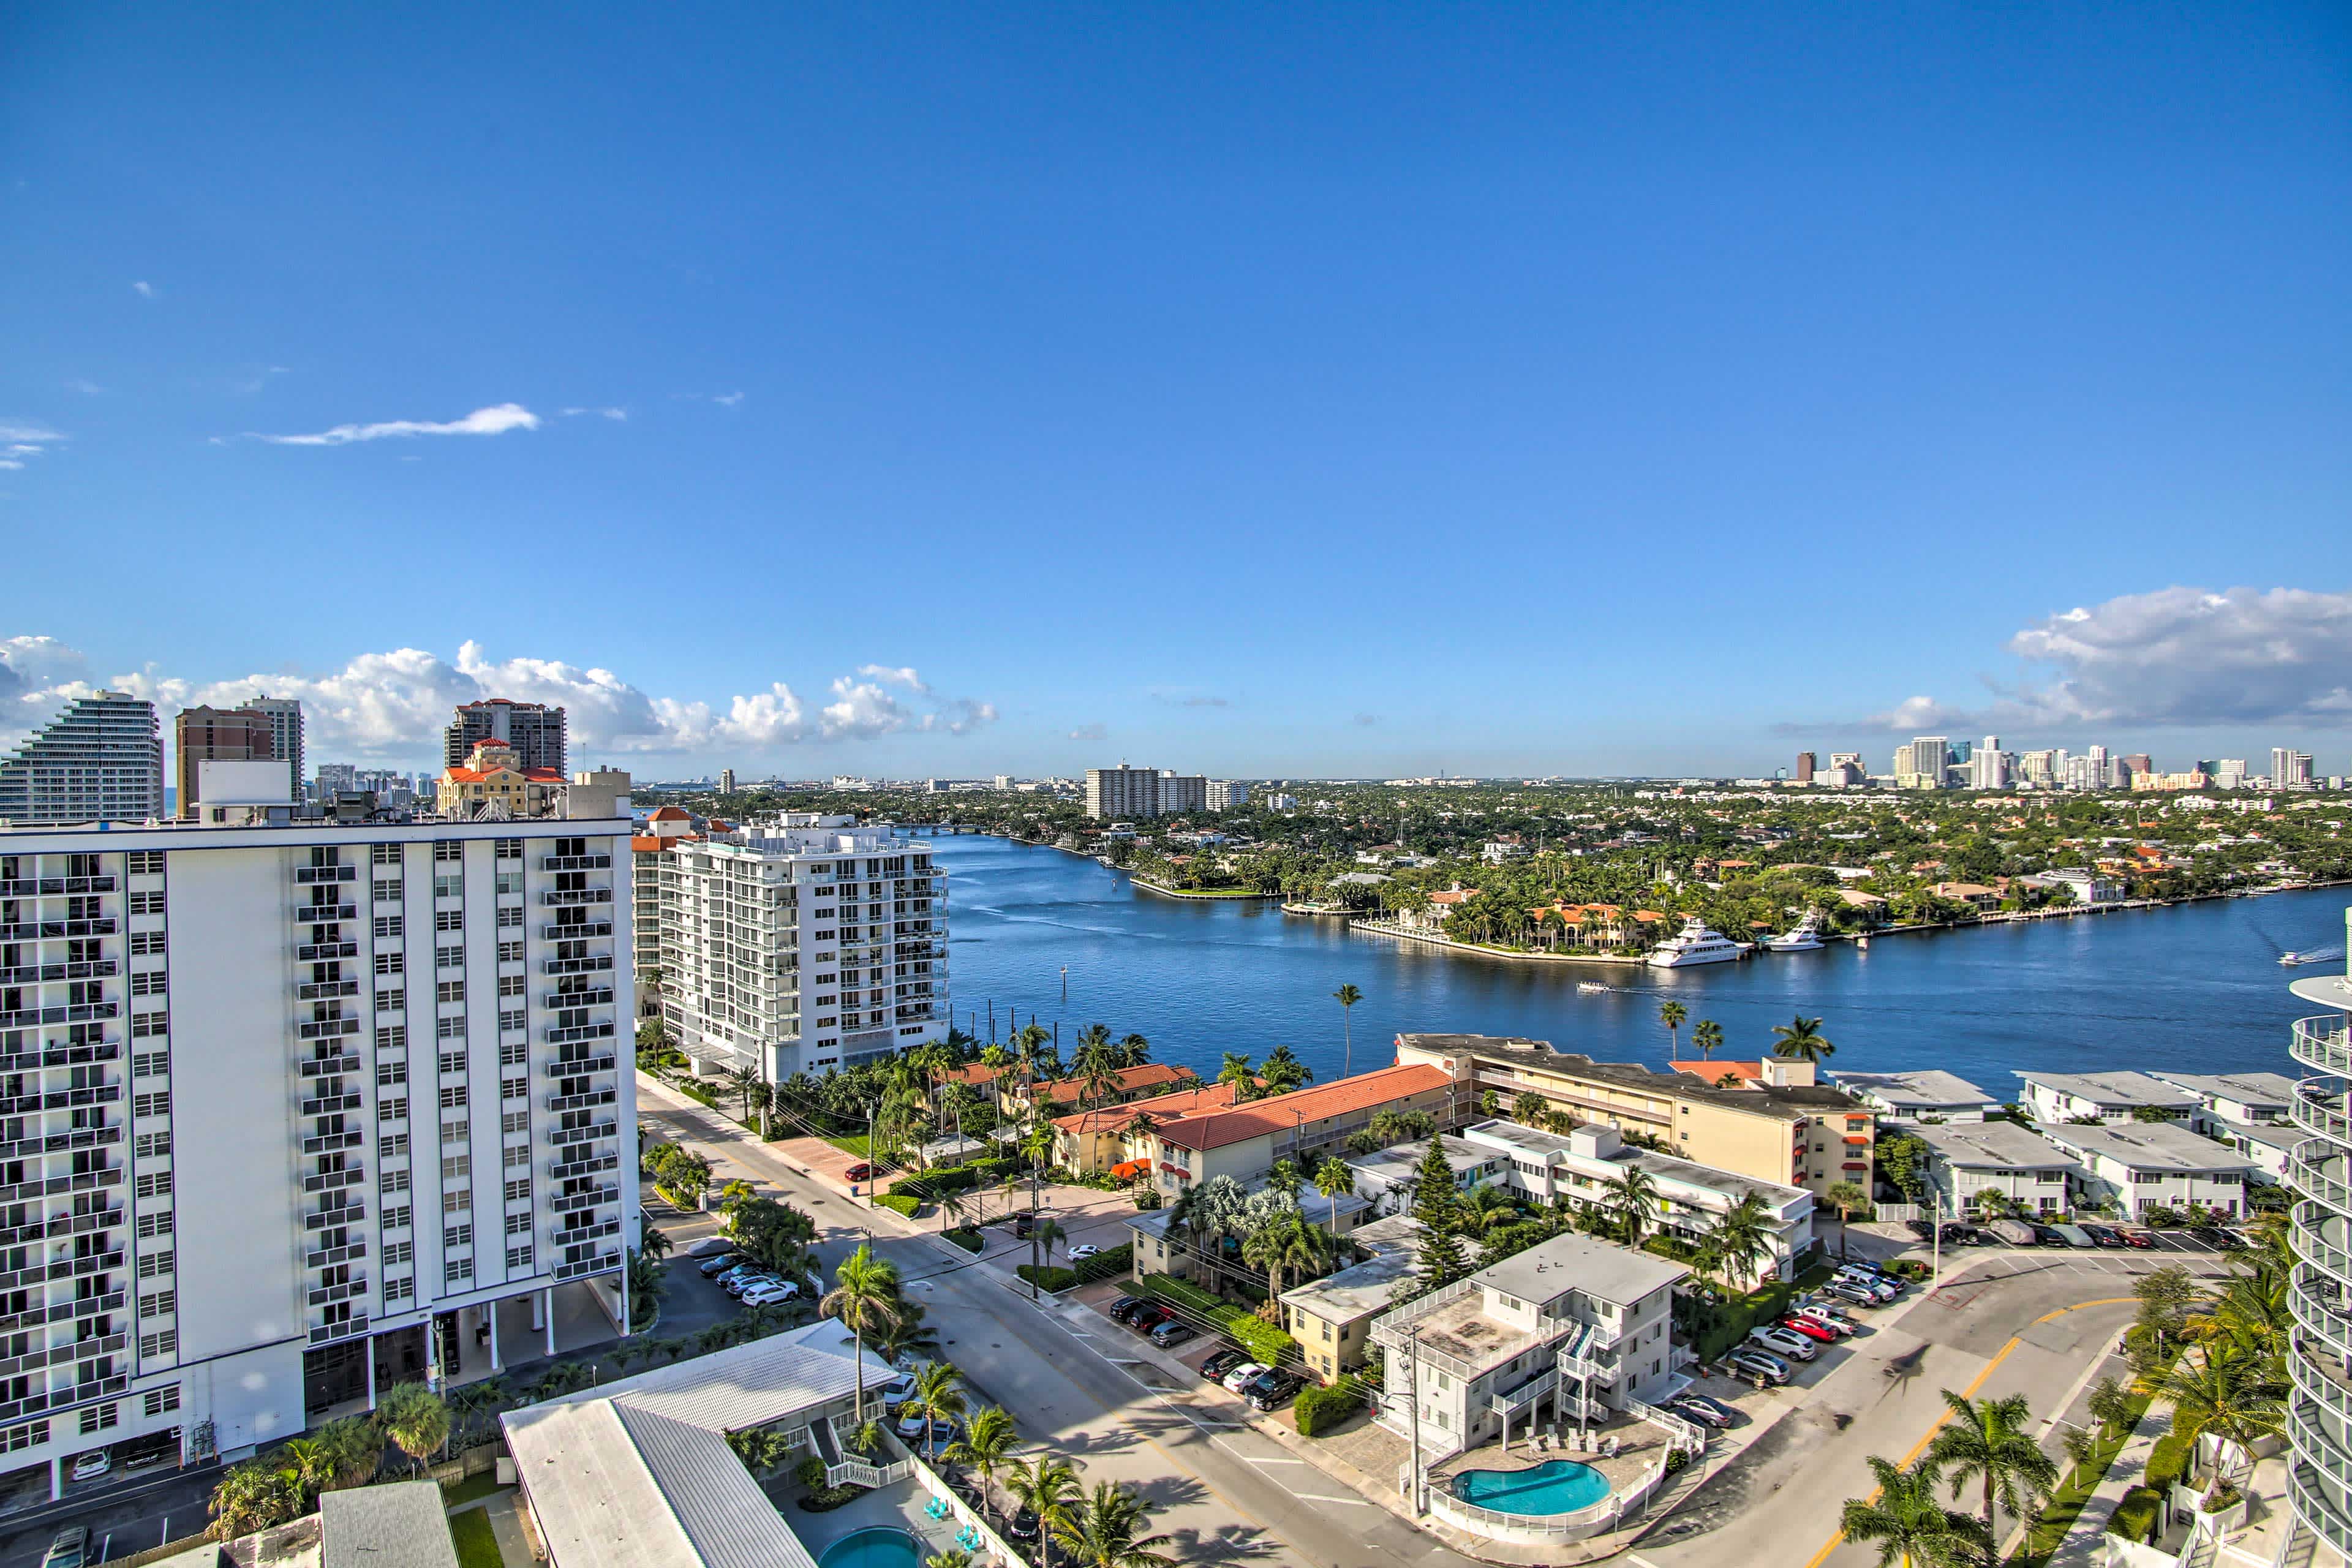 THE BEST Fort Lauderdale Vacation Rentals - Book Now